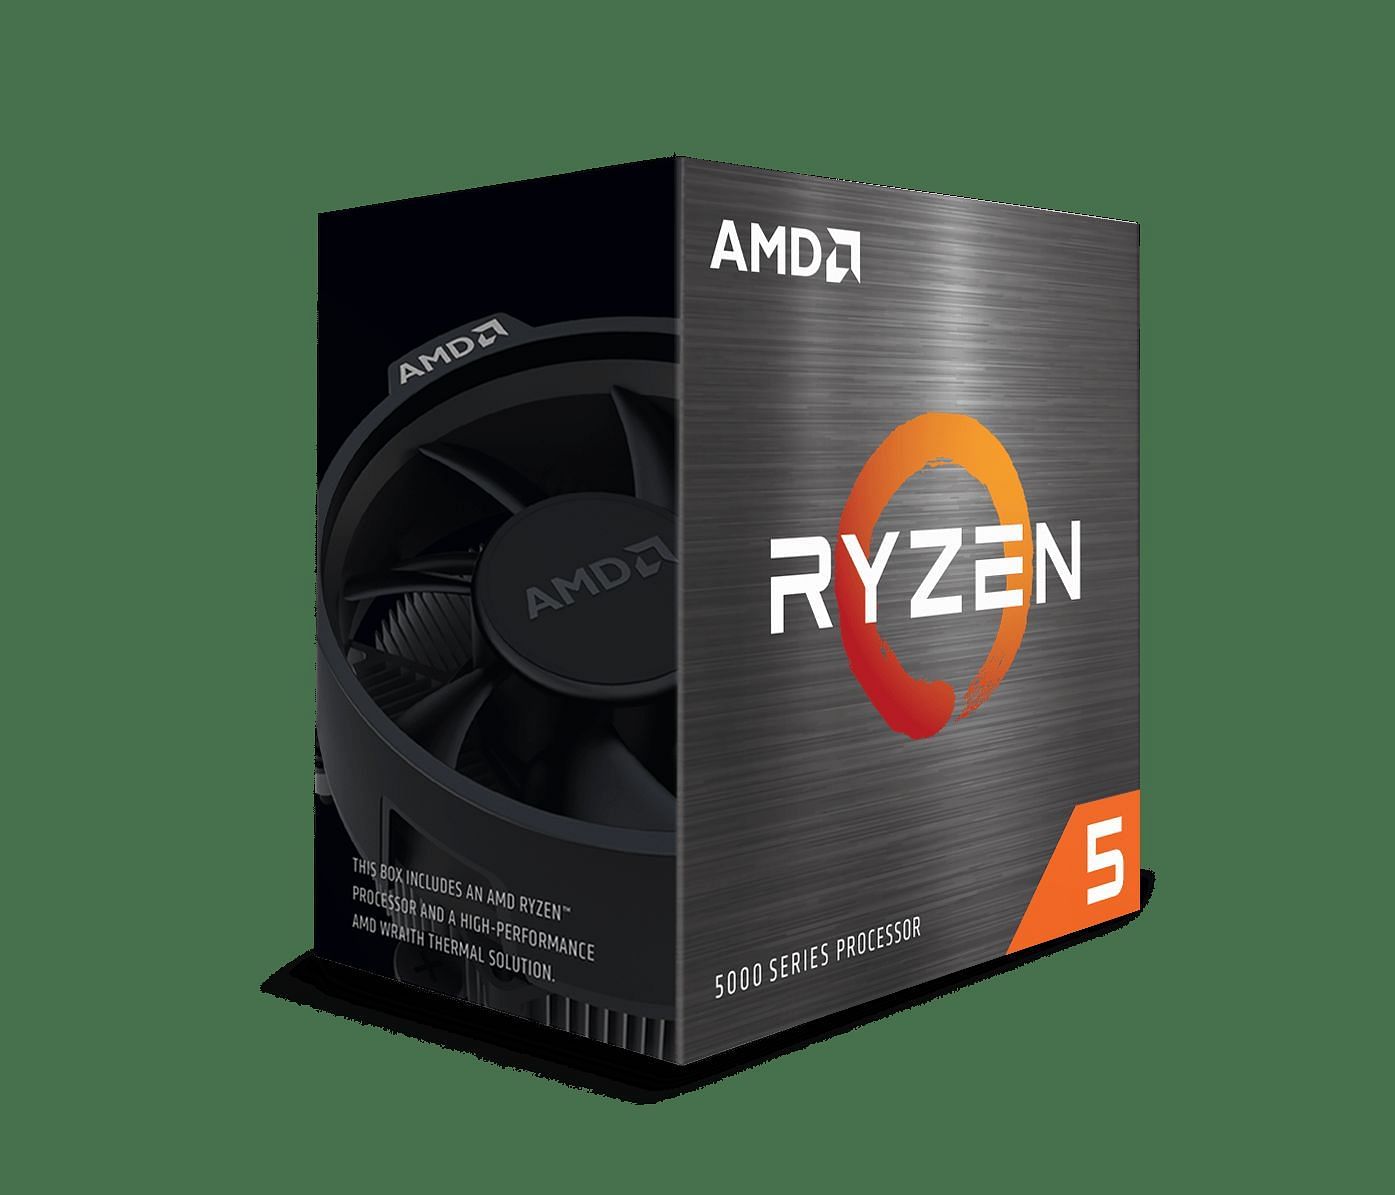 The Ryzen 5 5600G provides the best value for strong performances (Image via AMD)